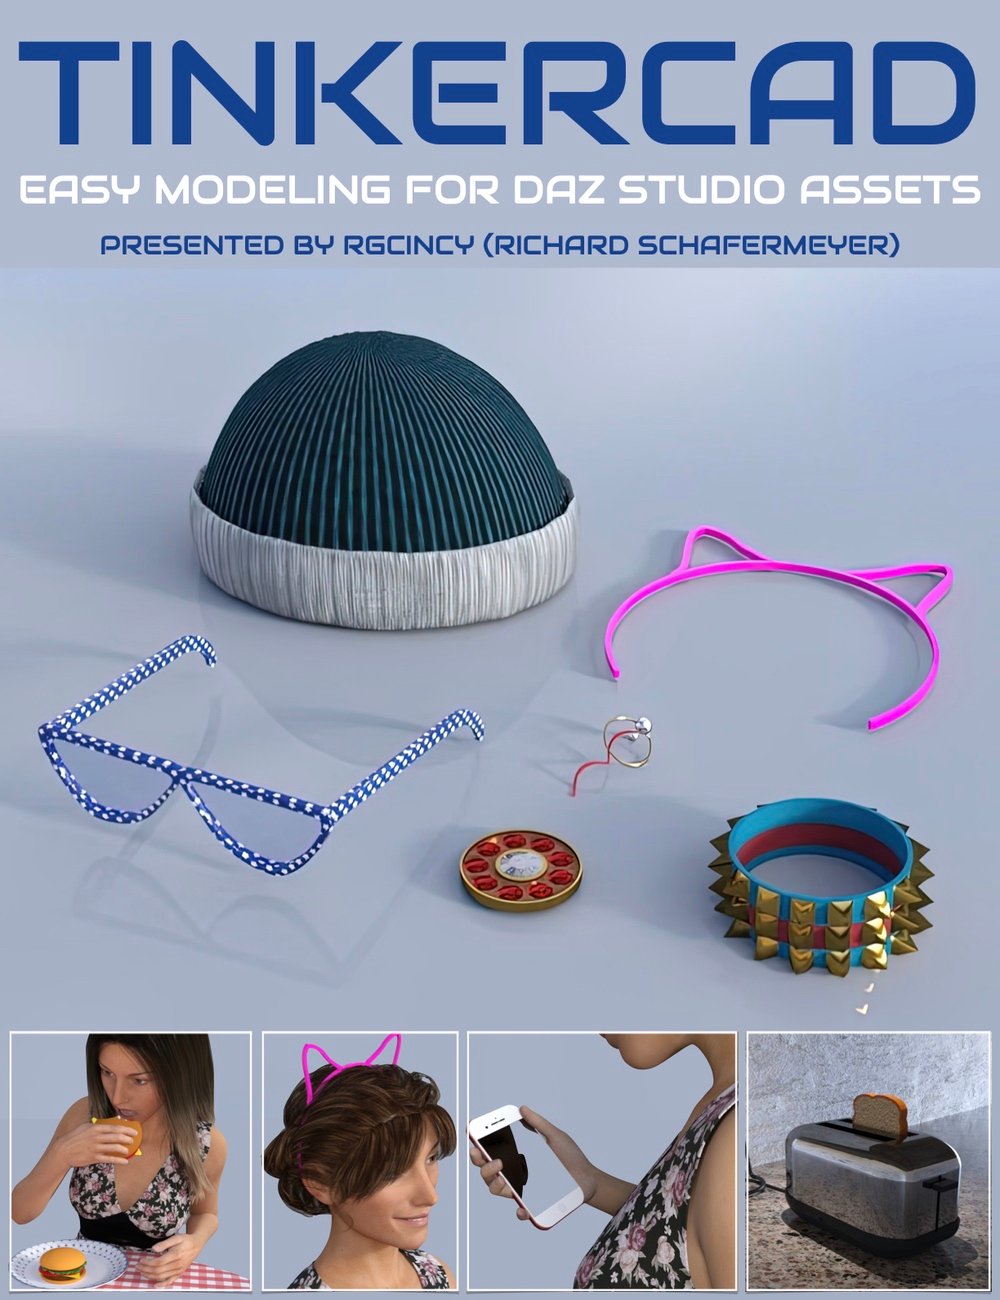 Tinkercad - Easy Modeling to Create DAZ Studio Assets by: Digital Art Live, 3D Models by Daz 3D